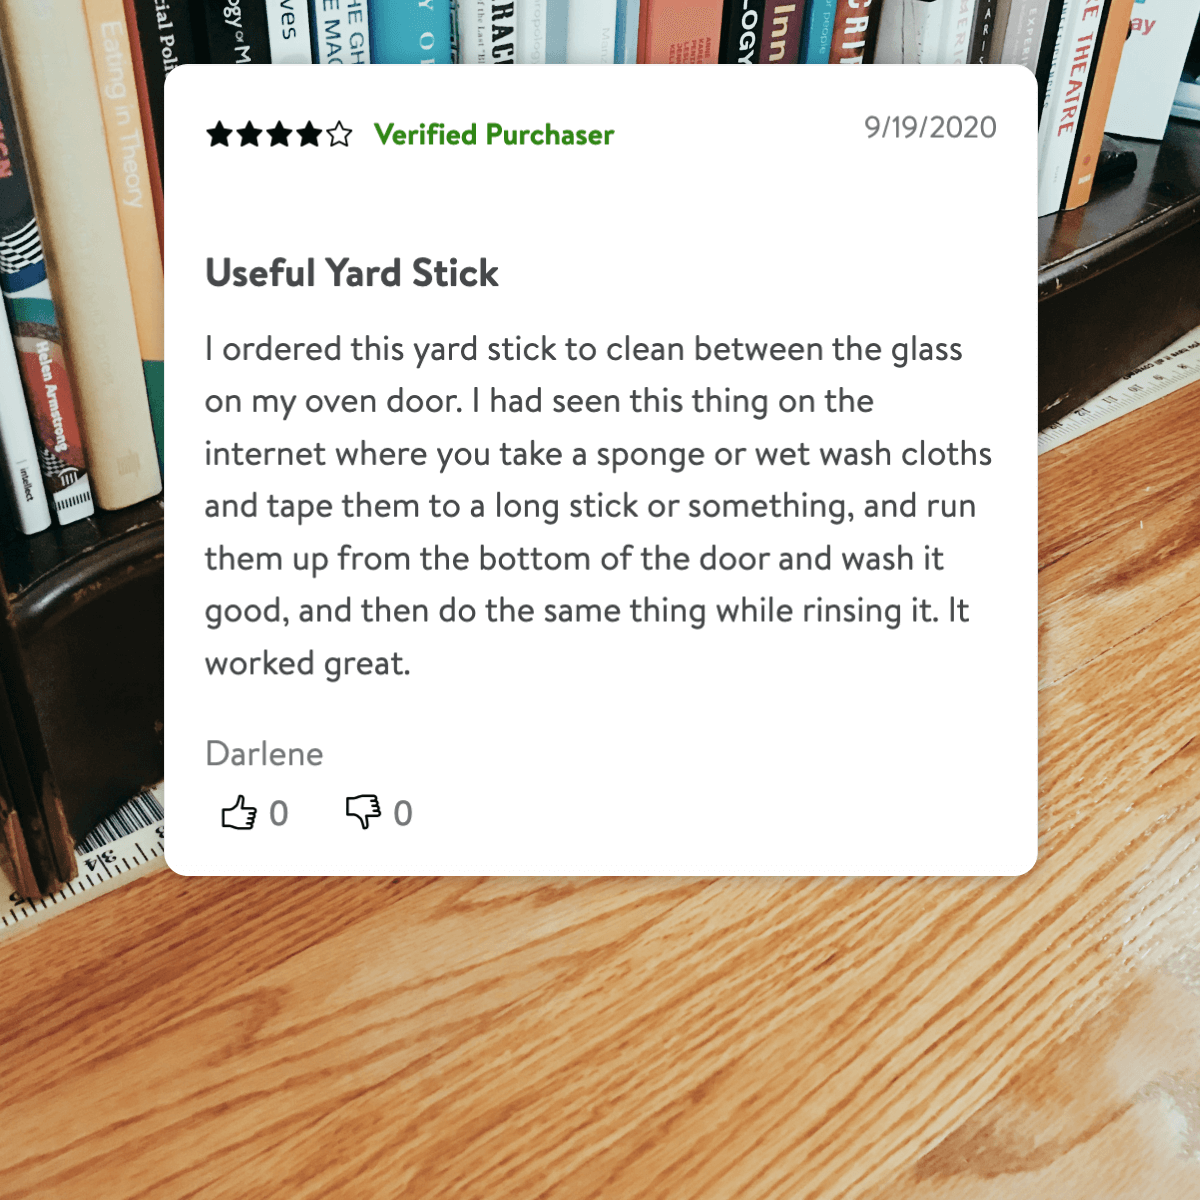 Online review that reads: ‘I ordered this yard stick to clean between the glass on my oven door. I had seen this thing on the internet where you take a sponge or wet wash cloths and tape them to a long stick or something, and run them up from the bottom of the door and wash it good, and then do the same thing while rinsing it. It worked great’